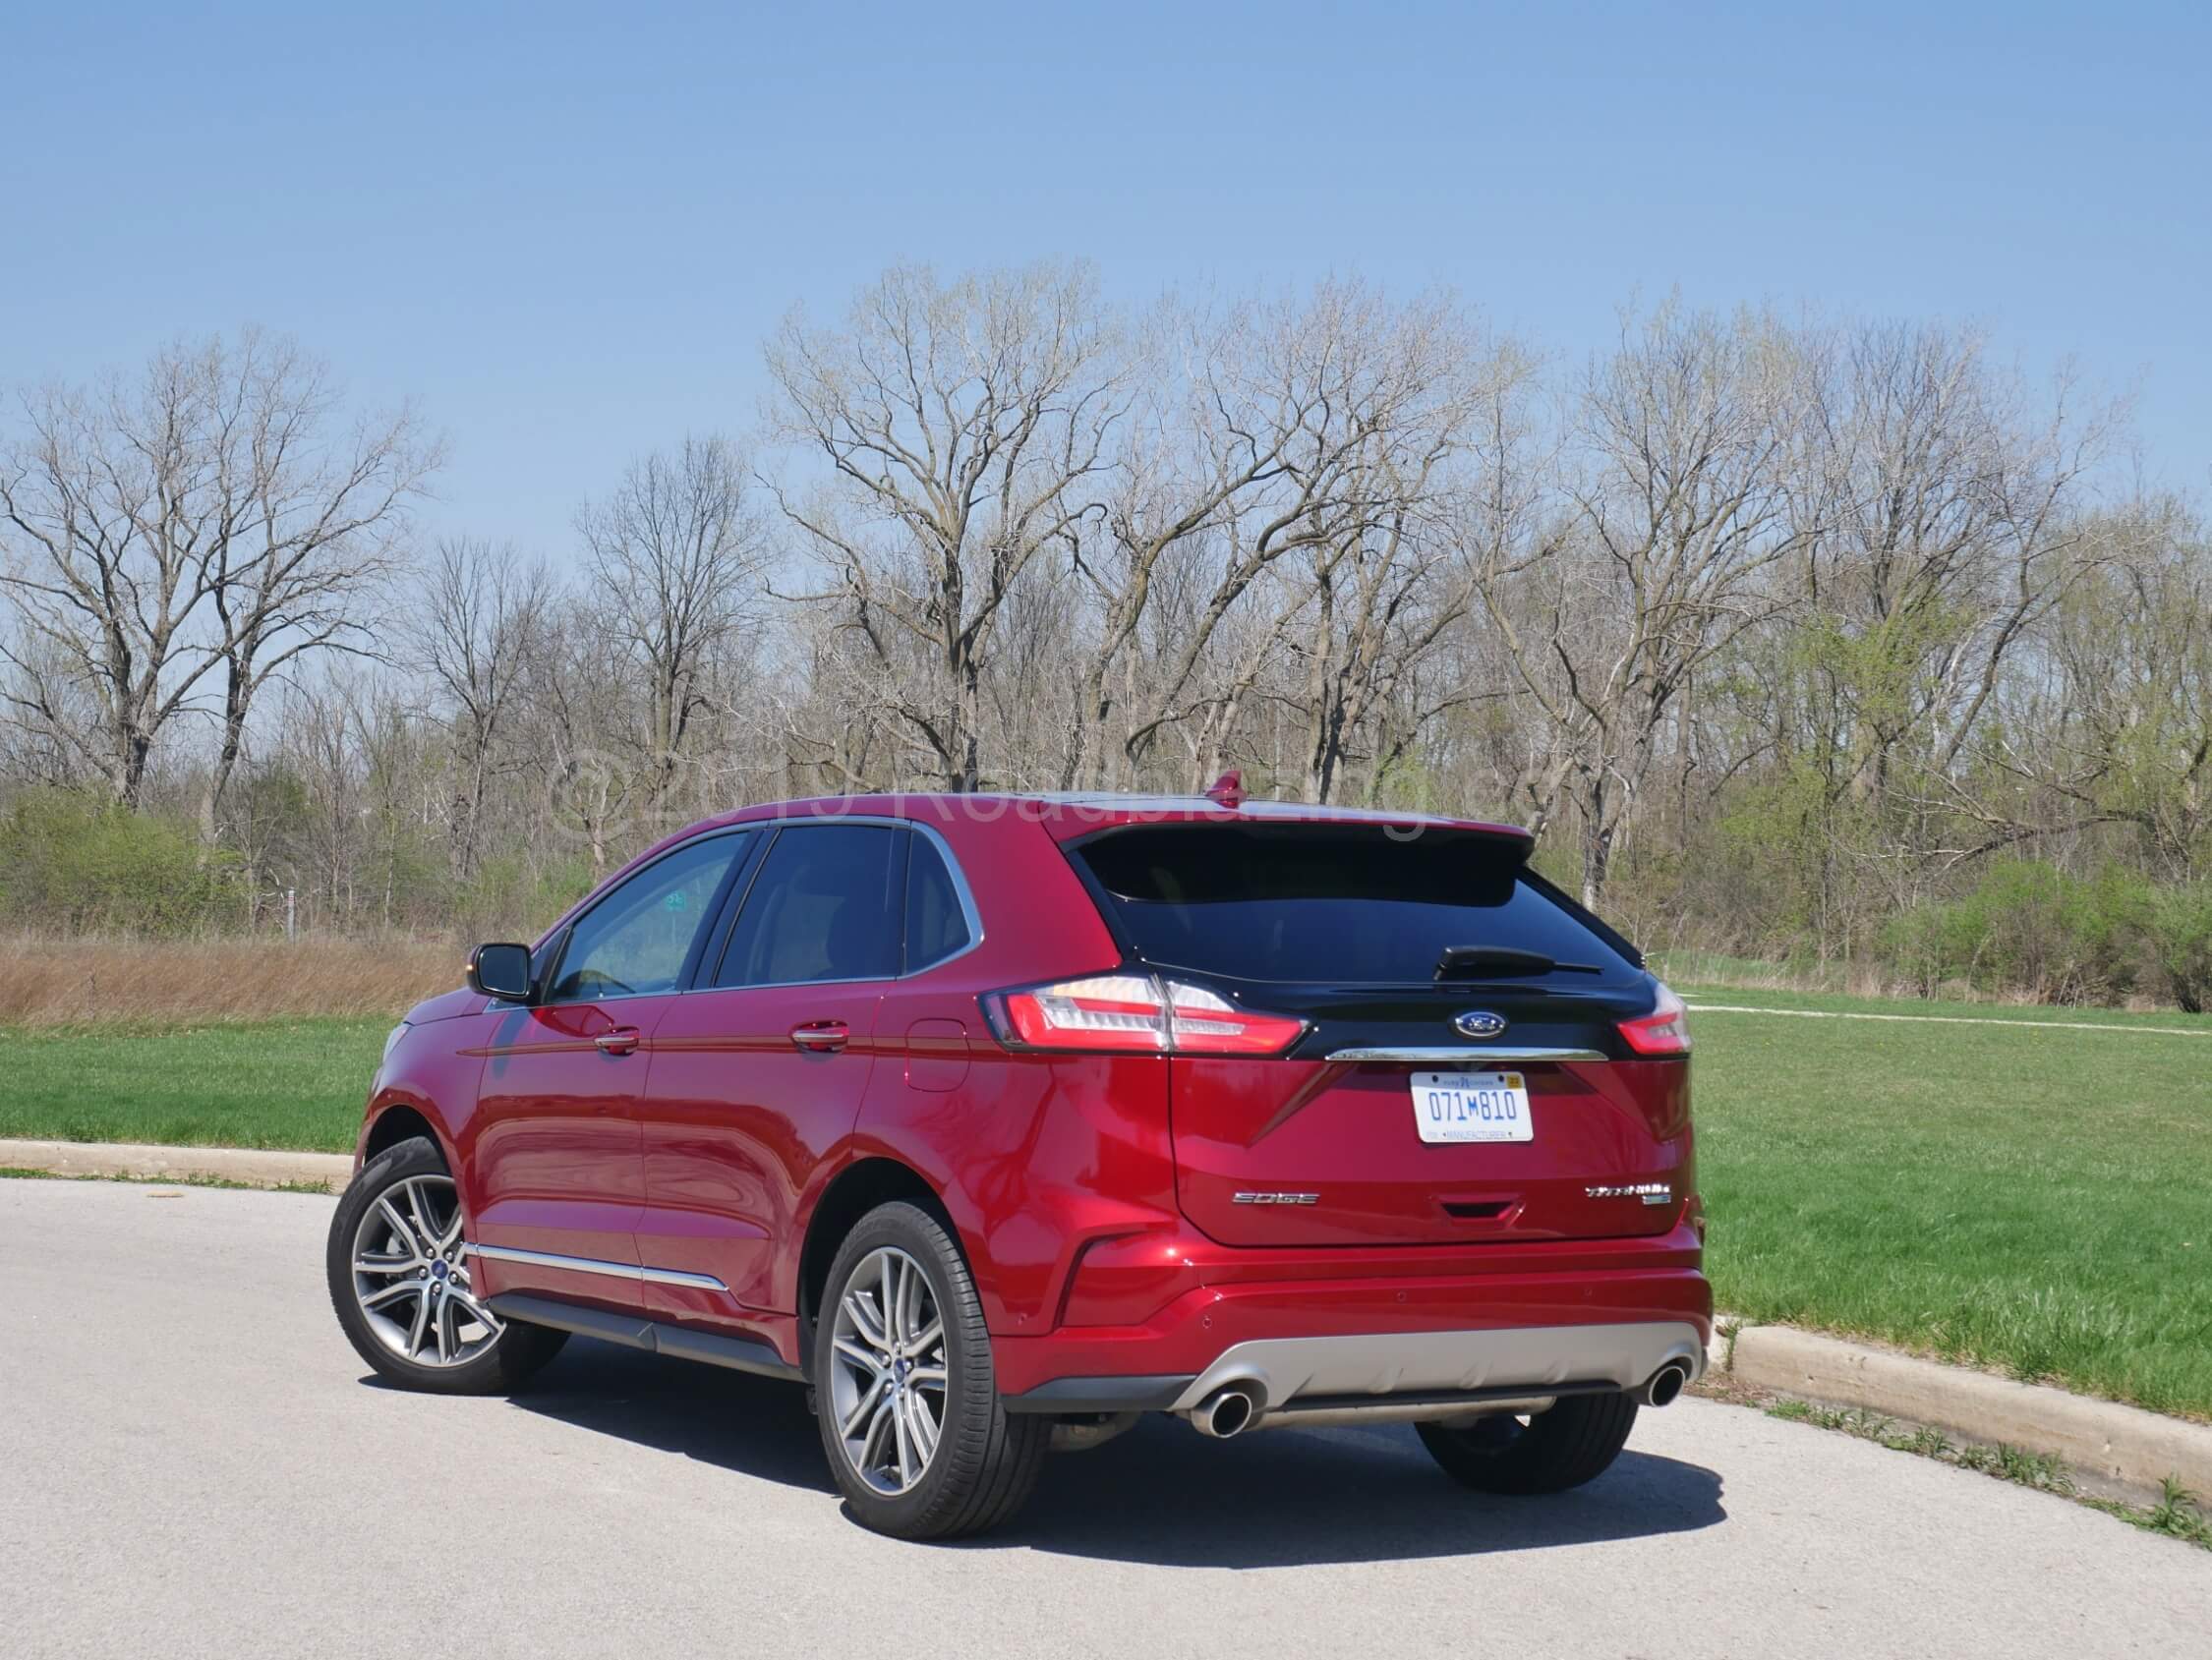 2019 Ford Edge Titanium AWD: Refresh in crossover SUV design = dramatized front & rear lower corner creases, narrower light housings, tweezed grille, contrast body cladding & simulated skid plates